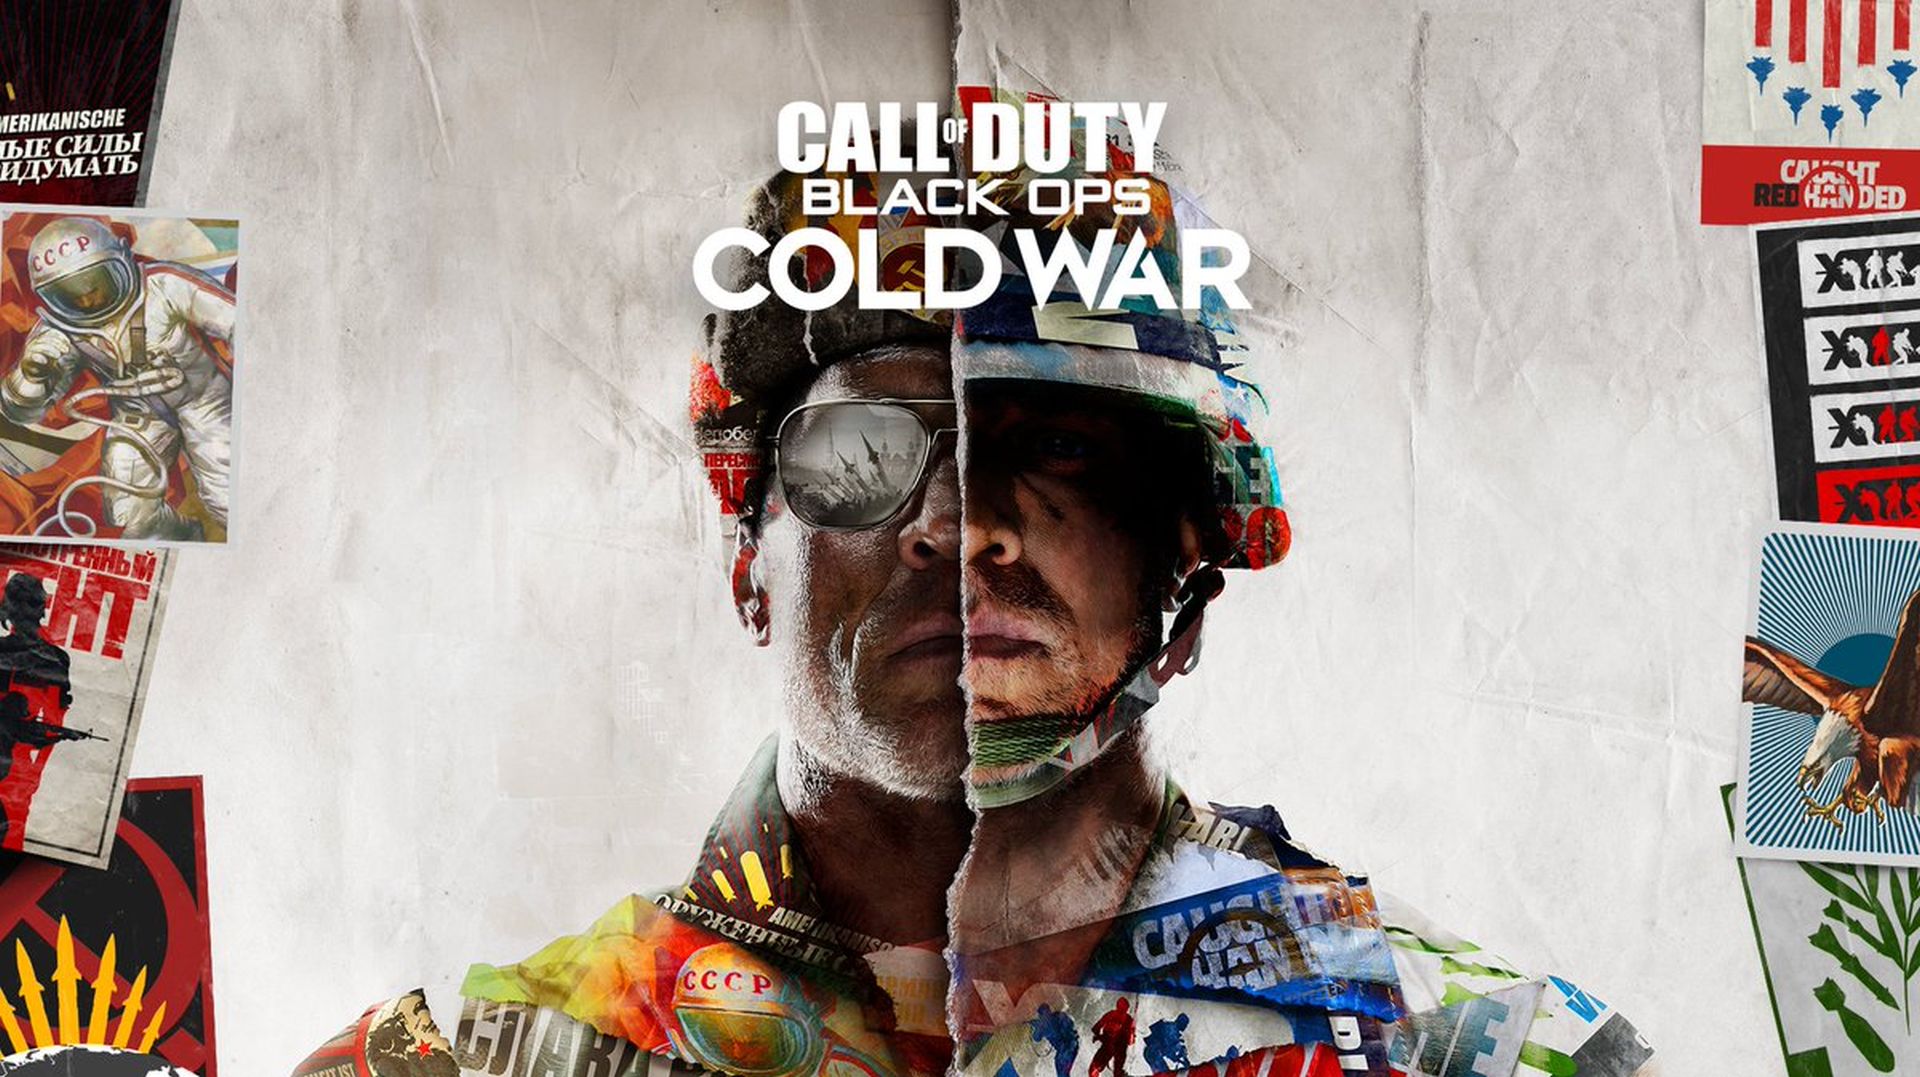 Call Of Duty: Black Ops Cold War Multiplayer Footage Leaks, Vip Escort Mode Revealed